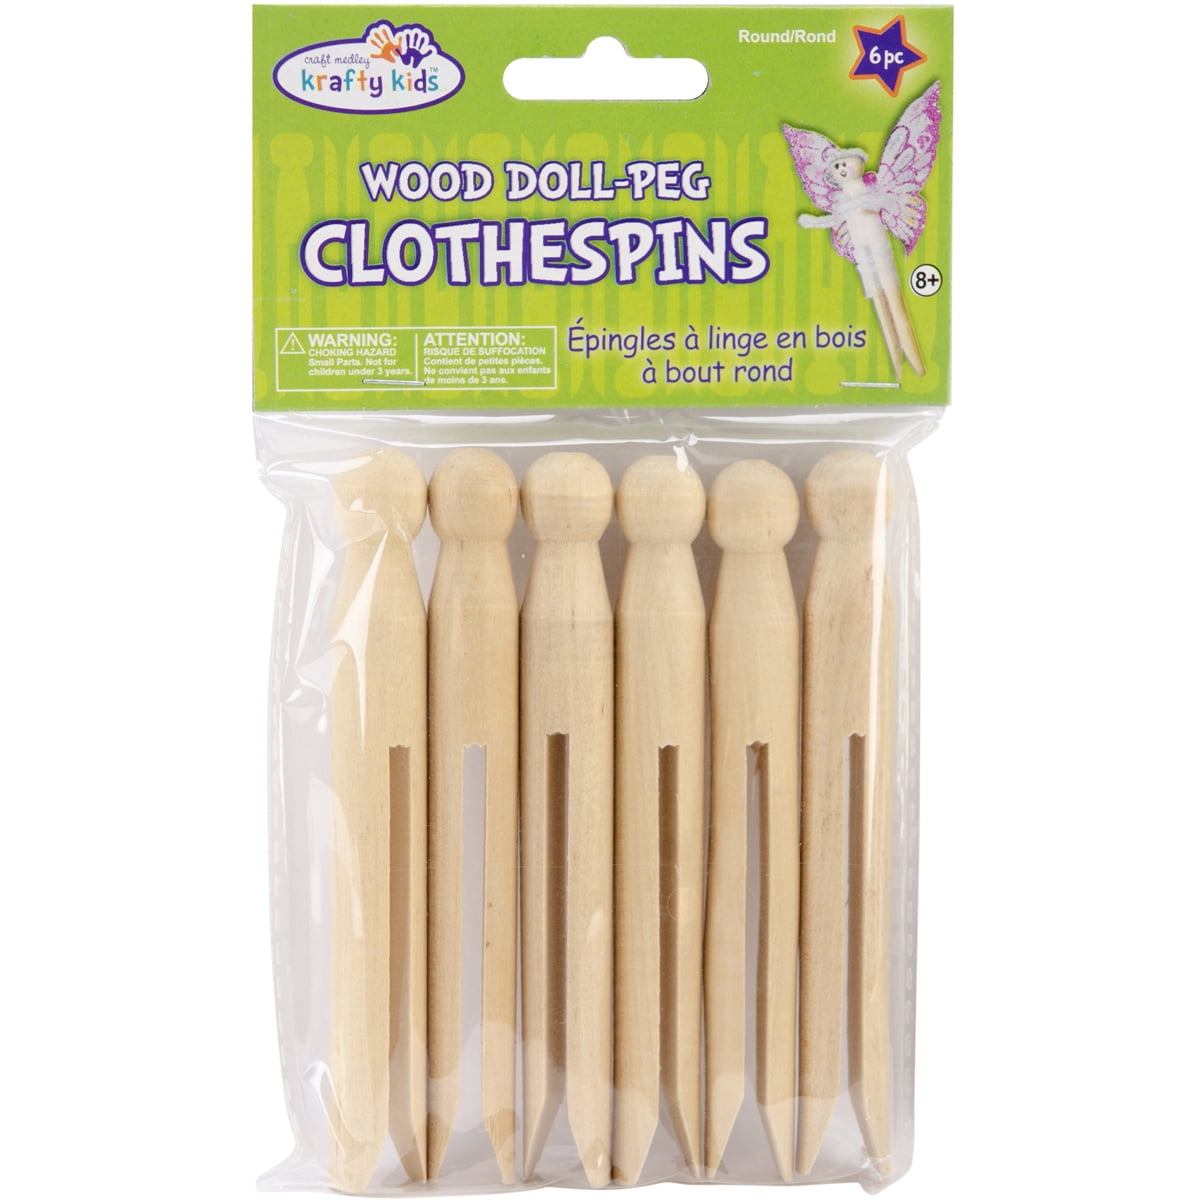 Penley Dollipins 50 Miniature Flat Clothespins Wood Crafts Model Making for  sale online